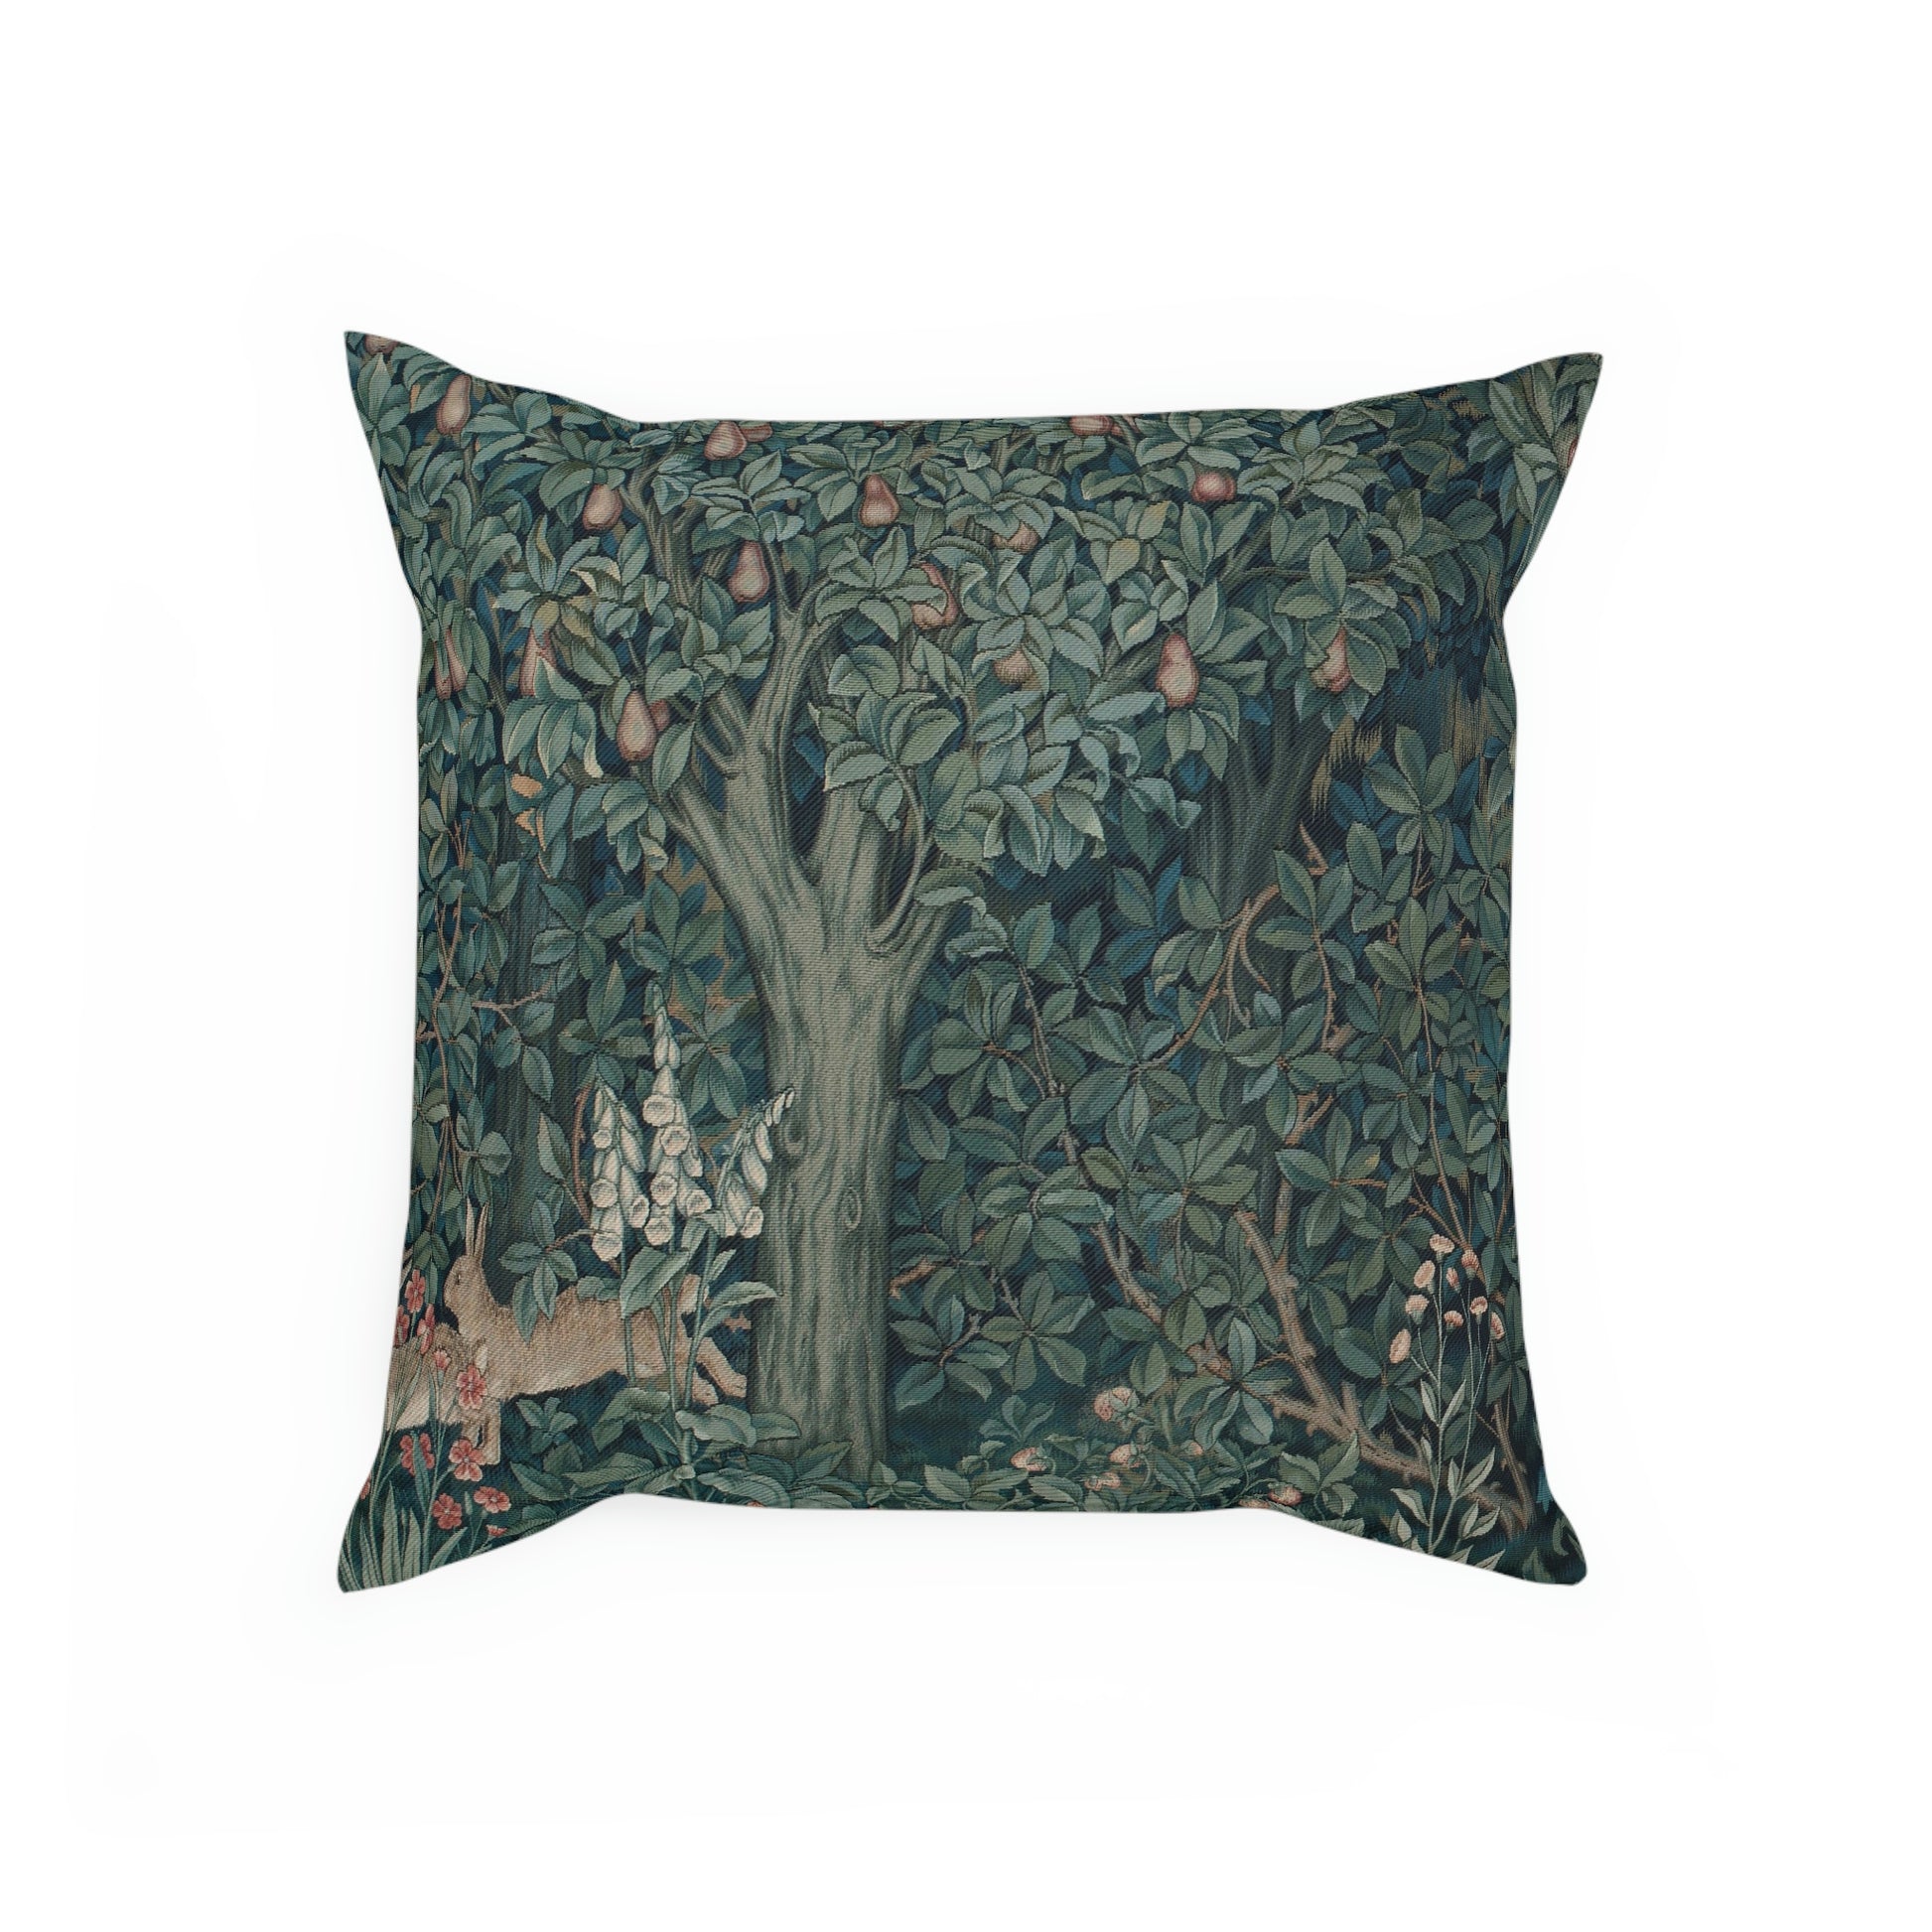 Rabbit-Cushion-and-Cushion-Cover-by-John-Henry-Dearle-Green-Forest-Collection-7